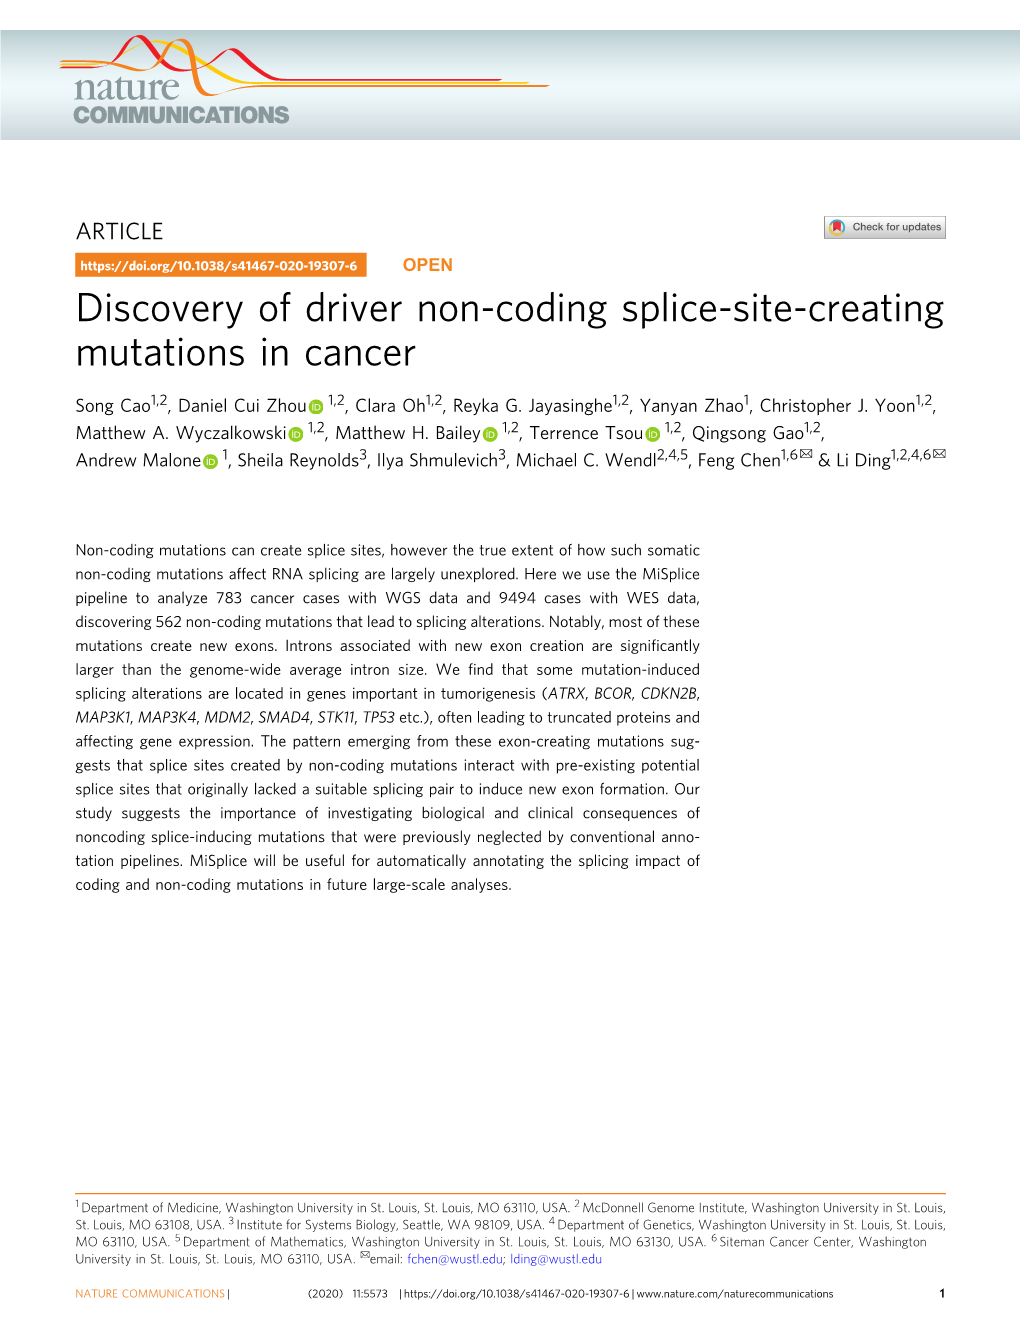 Discovery of Driver Non-Coding Splice-Site-Creating Mutations in Cancer